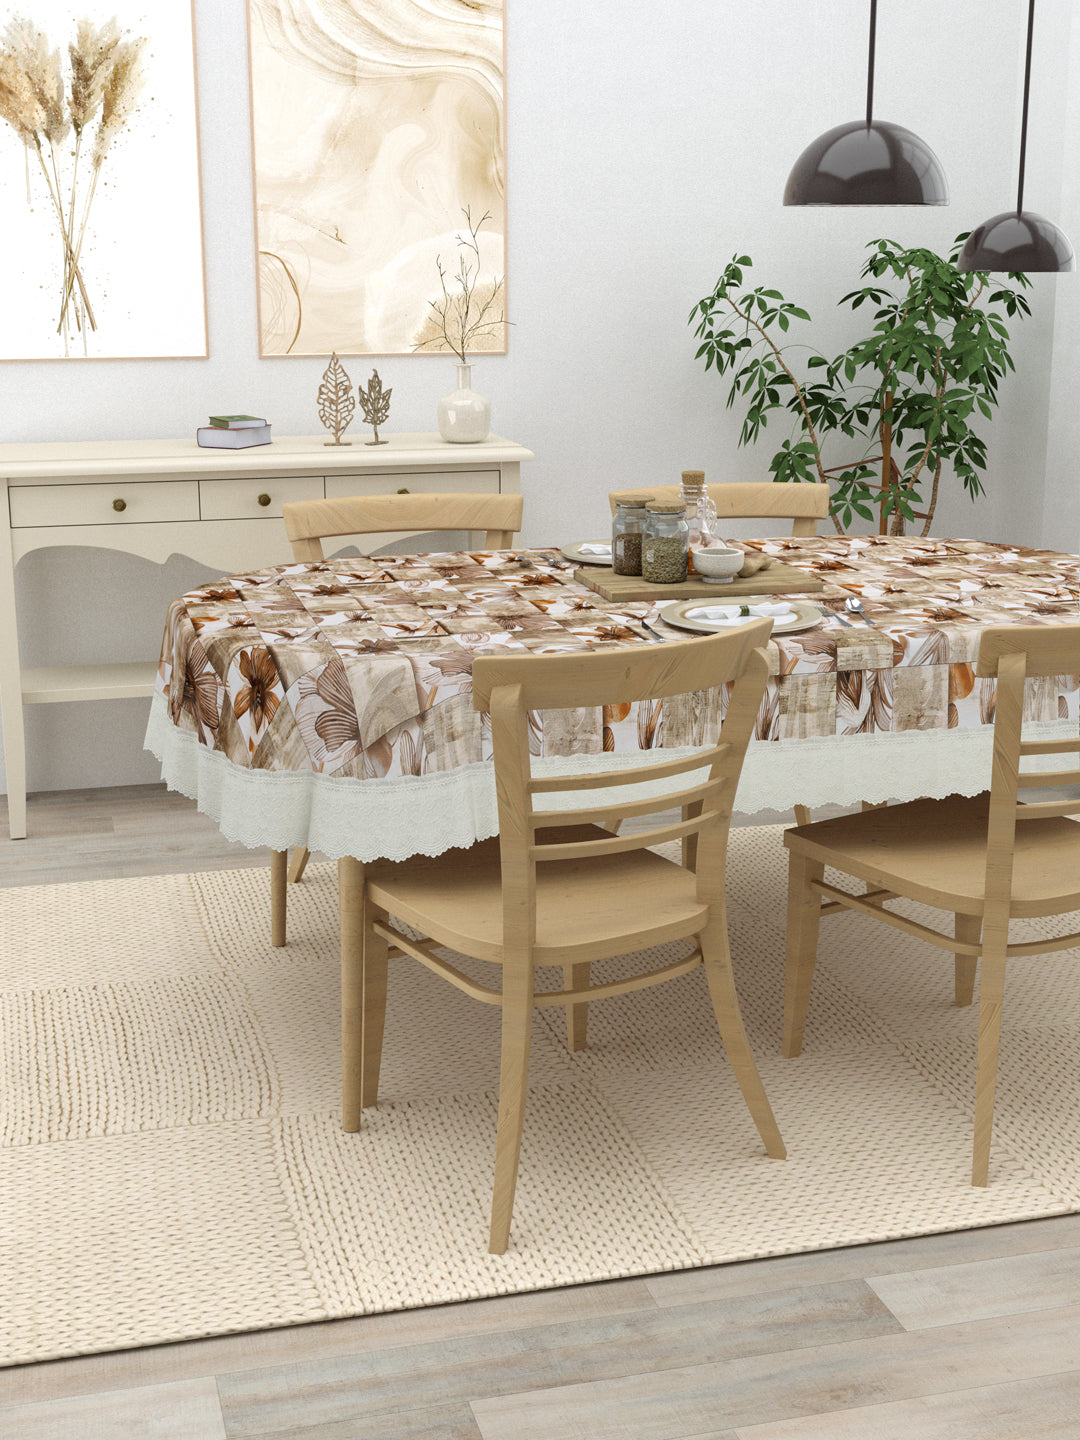 4 Seater Oval Dining Table Cover; 54x78 Inches; Material - PVC; Anti Slip; Brown Flowers & Checks